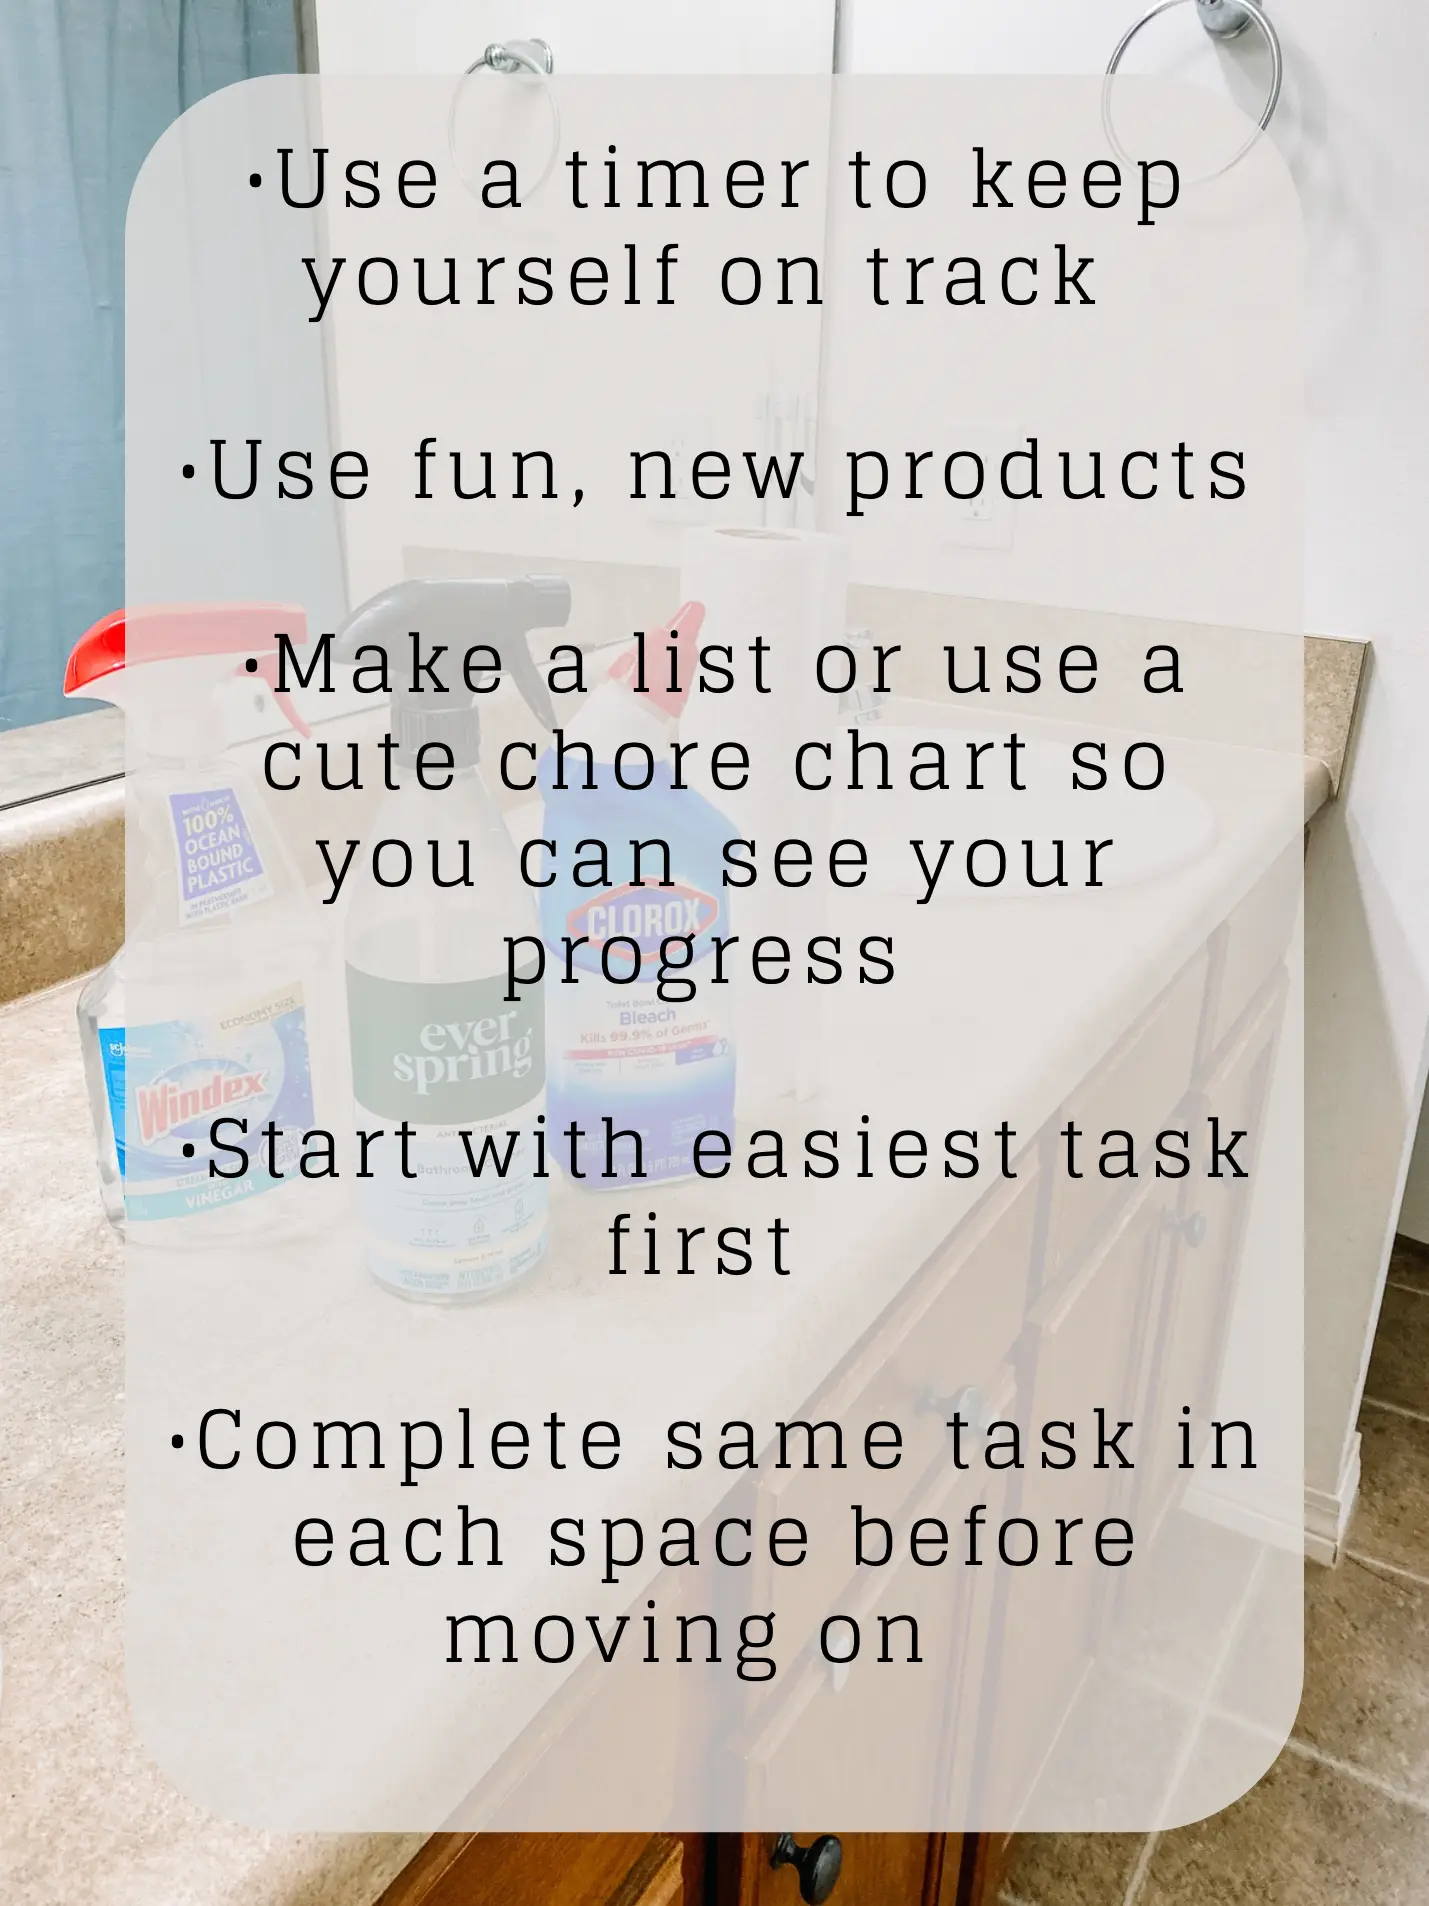 Chore chart for adults! I love it. : r/CleaningTips